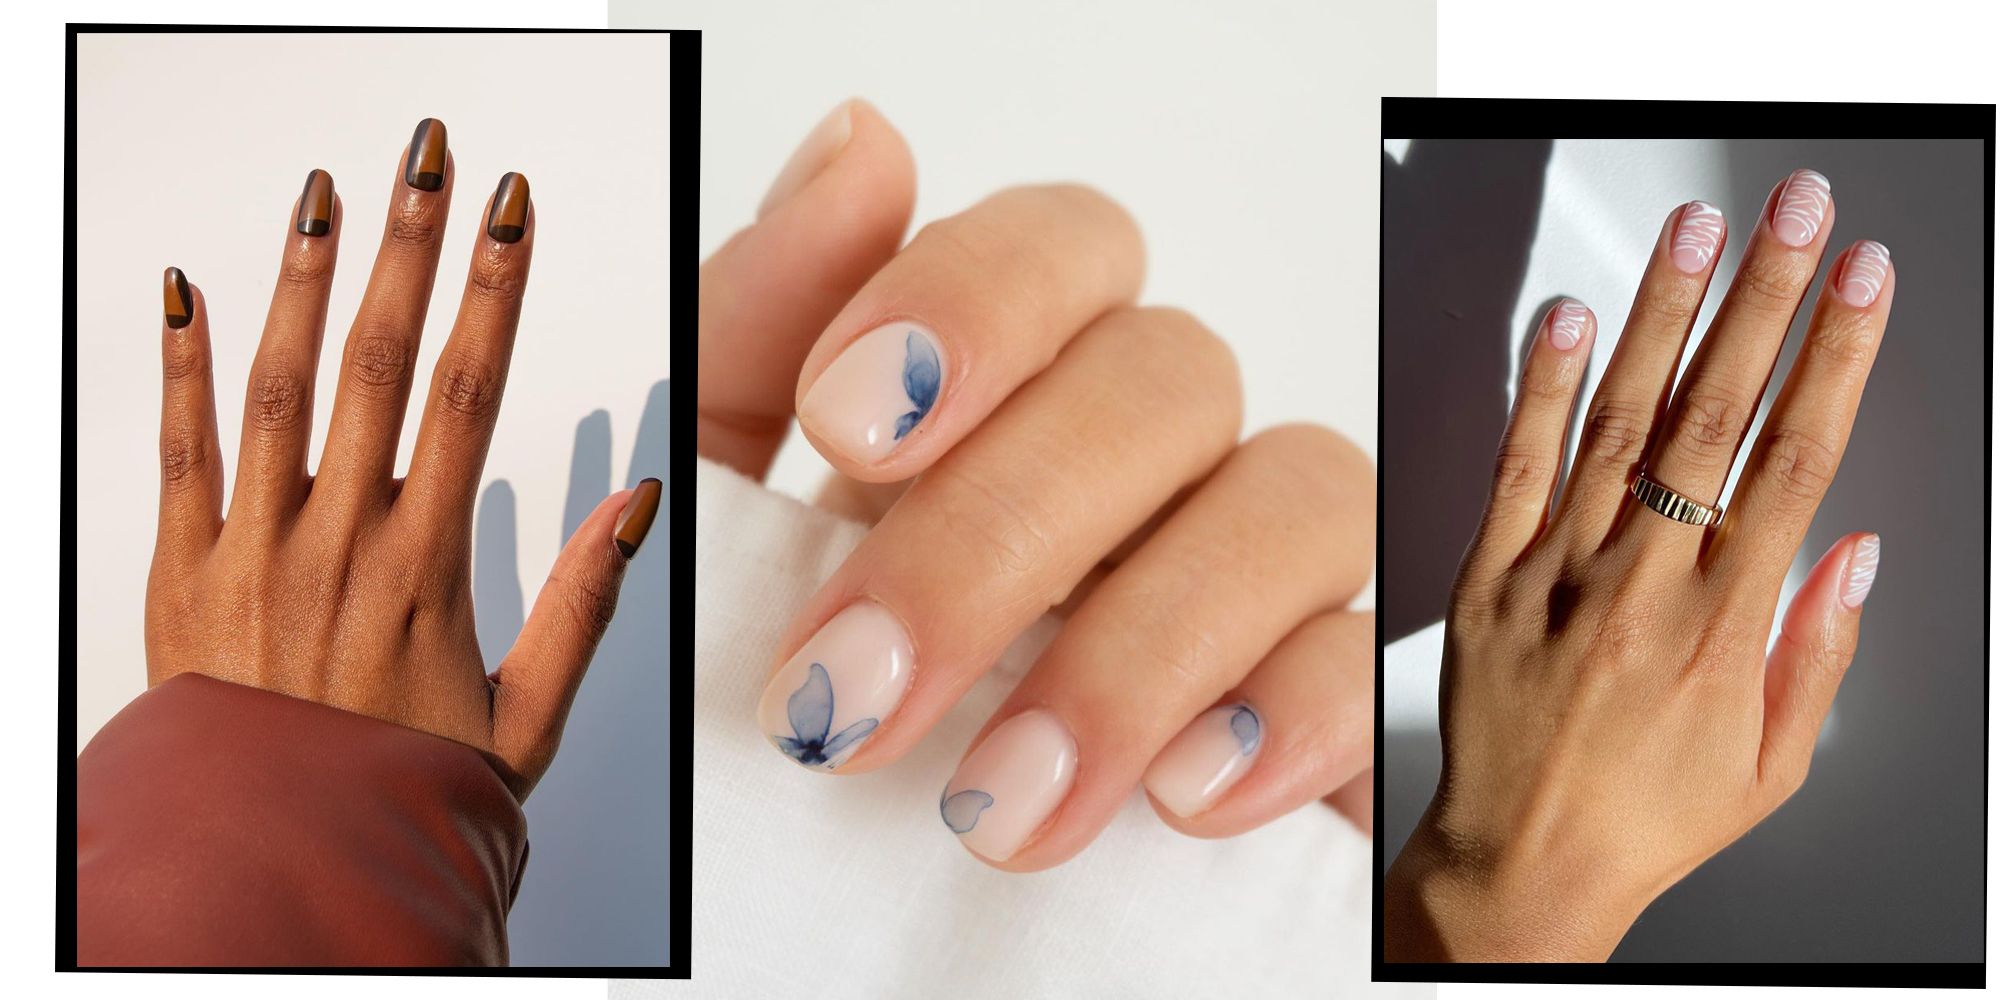 20 Simple Nail Designs For Everyday Chic | Glamour UK